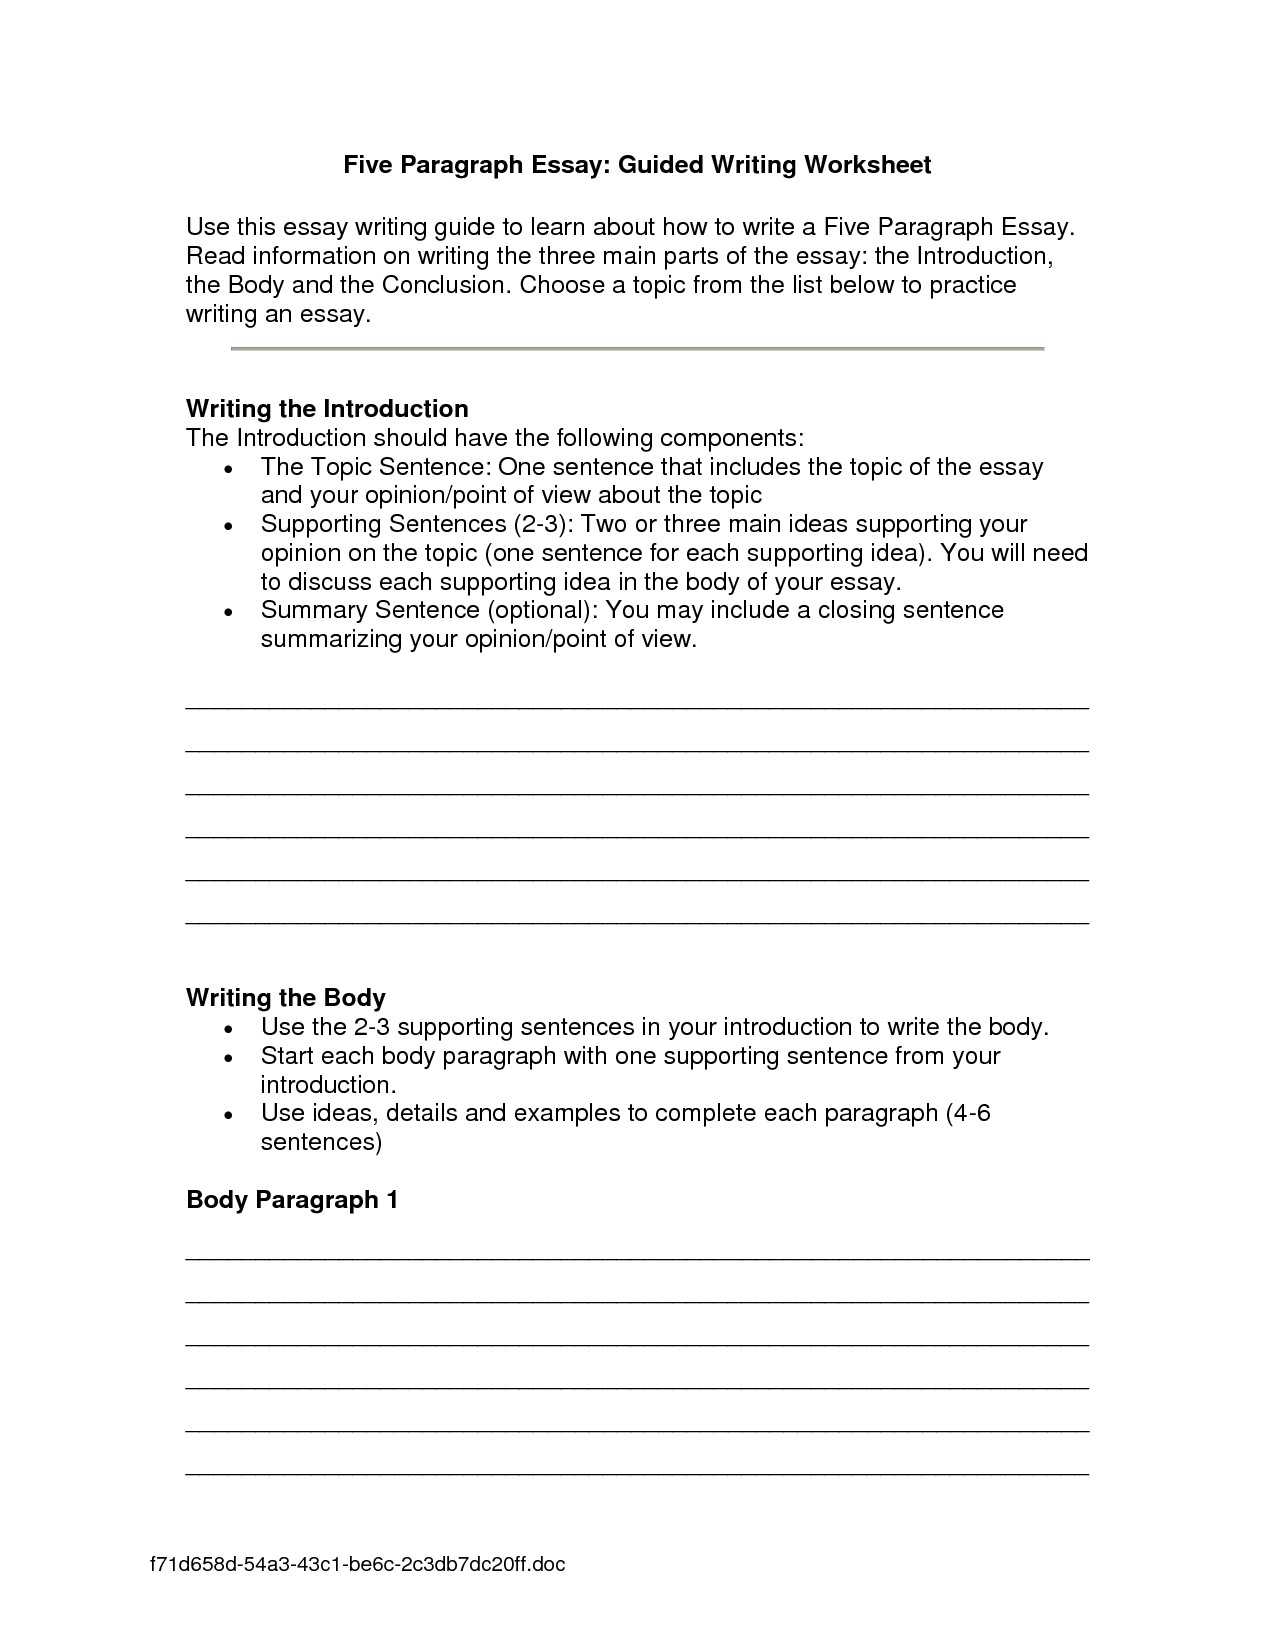 Thesis Statement Practice Worksheet as Well as Review Essay Getting with the Act Of Action Research